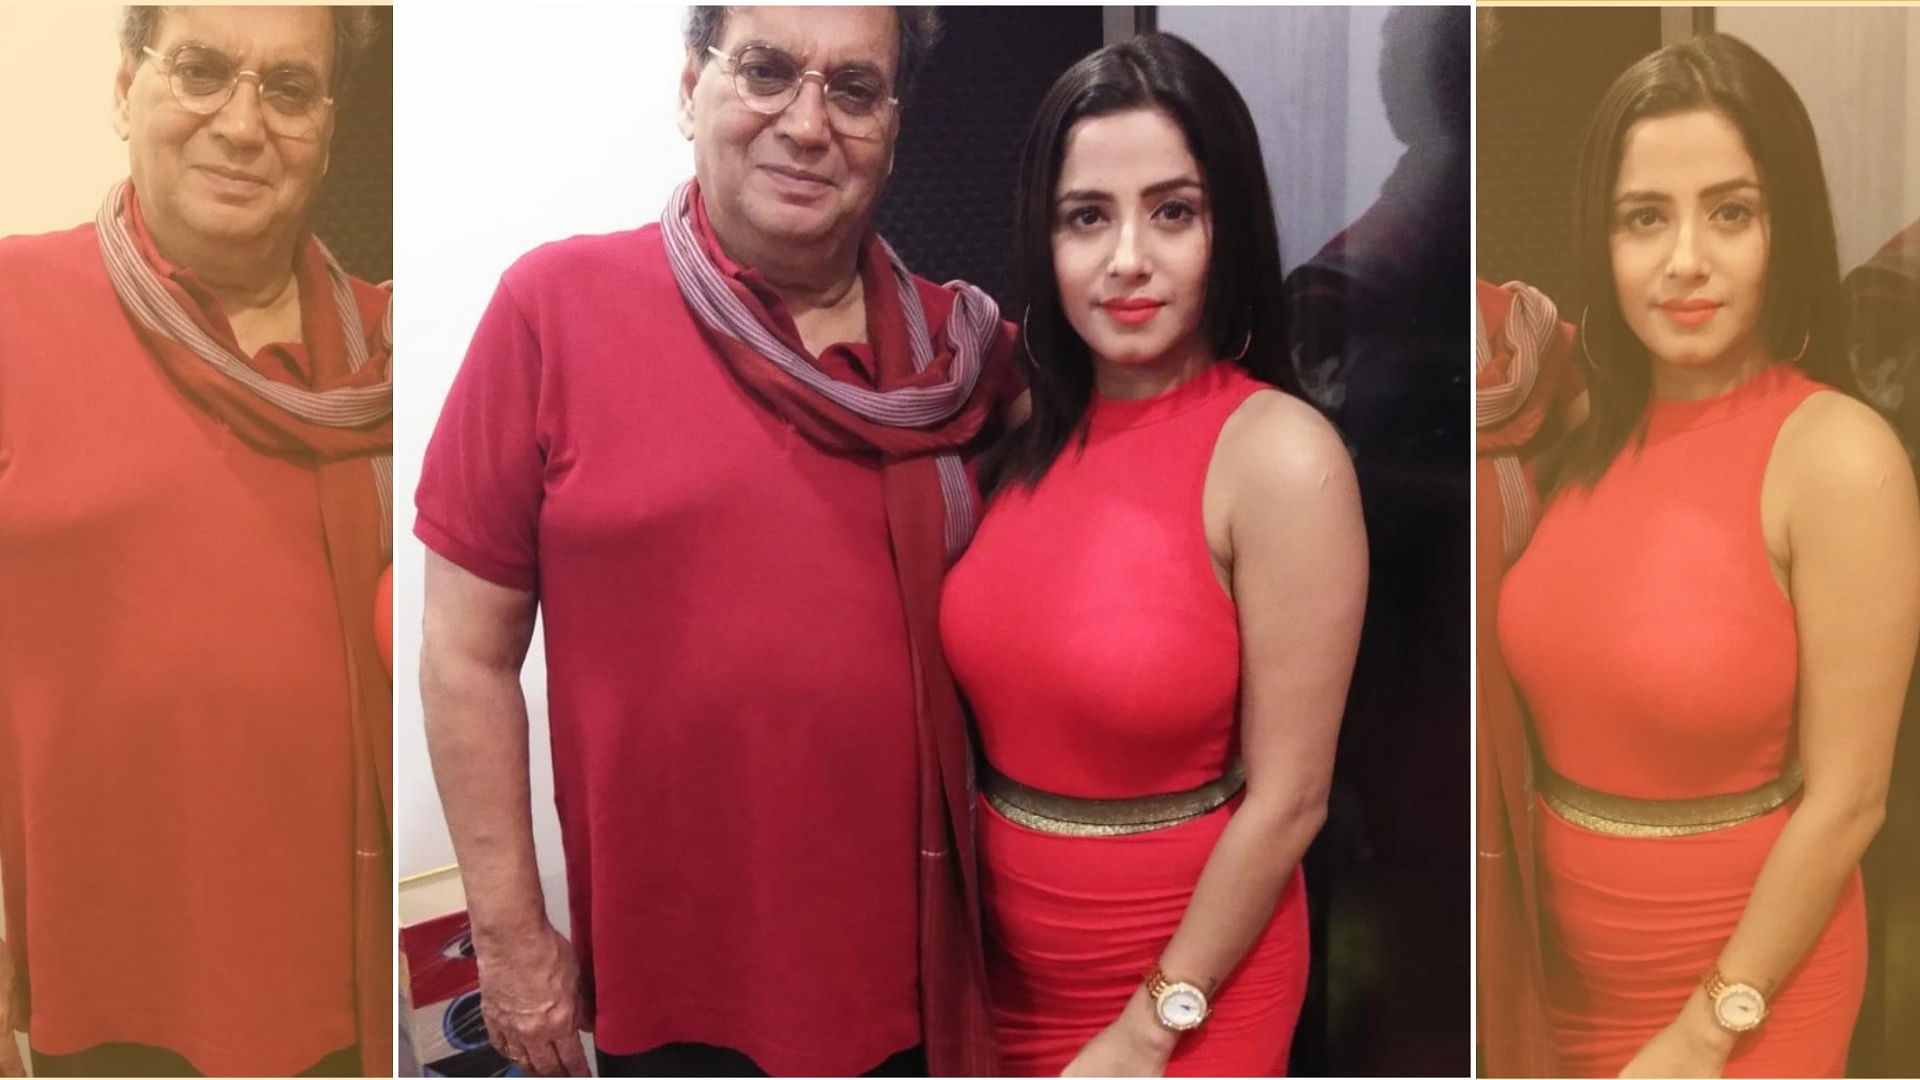 Kate Sharma says Subhash Ghai tried to forcibly kiss her.